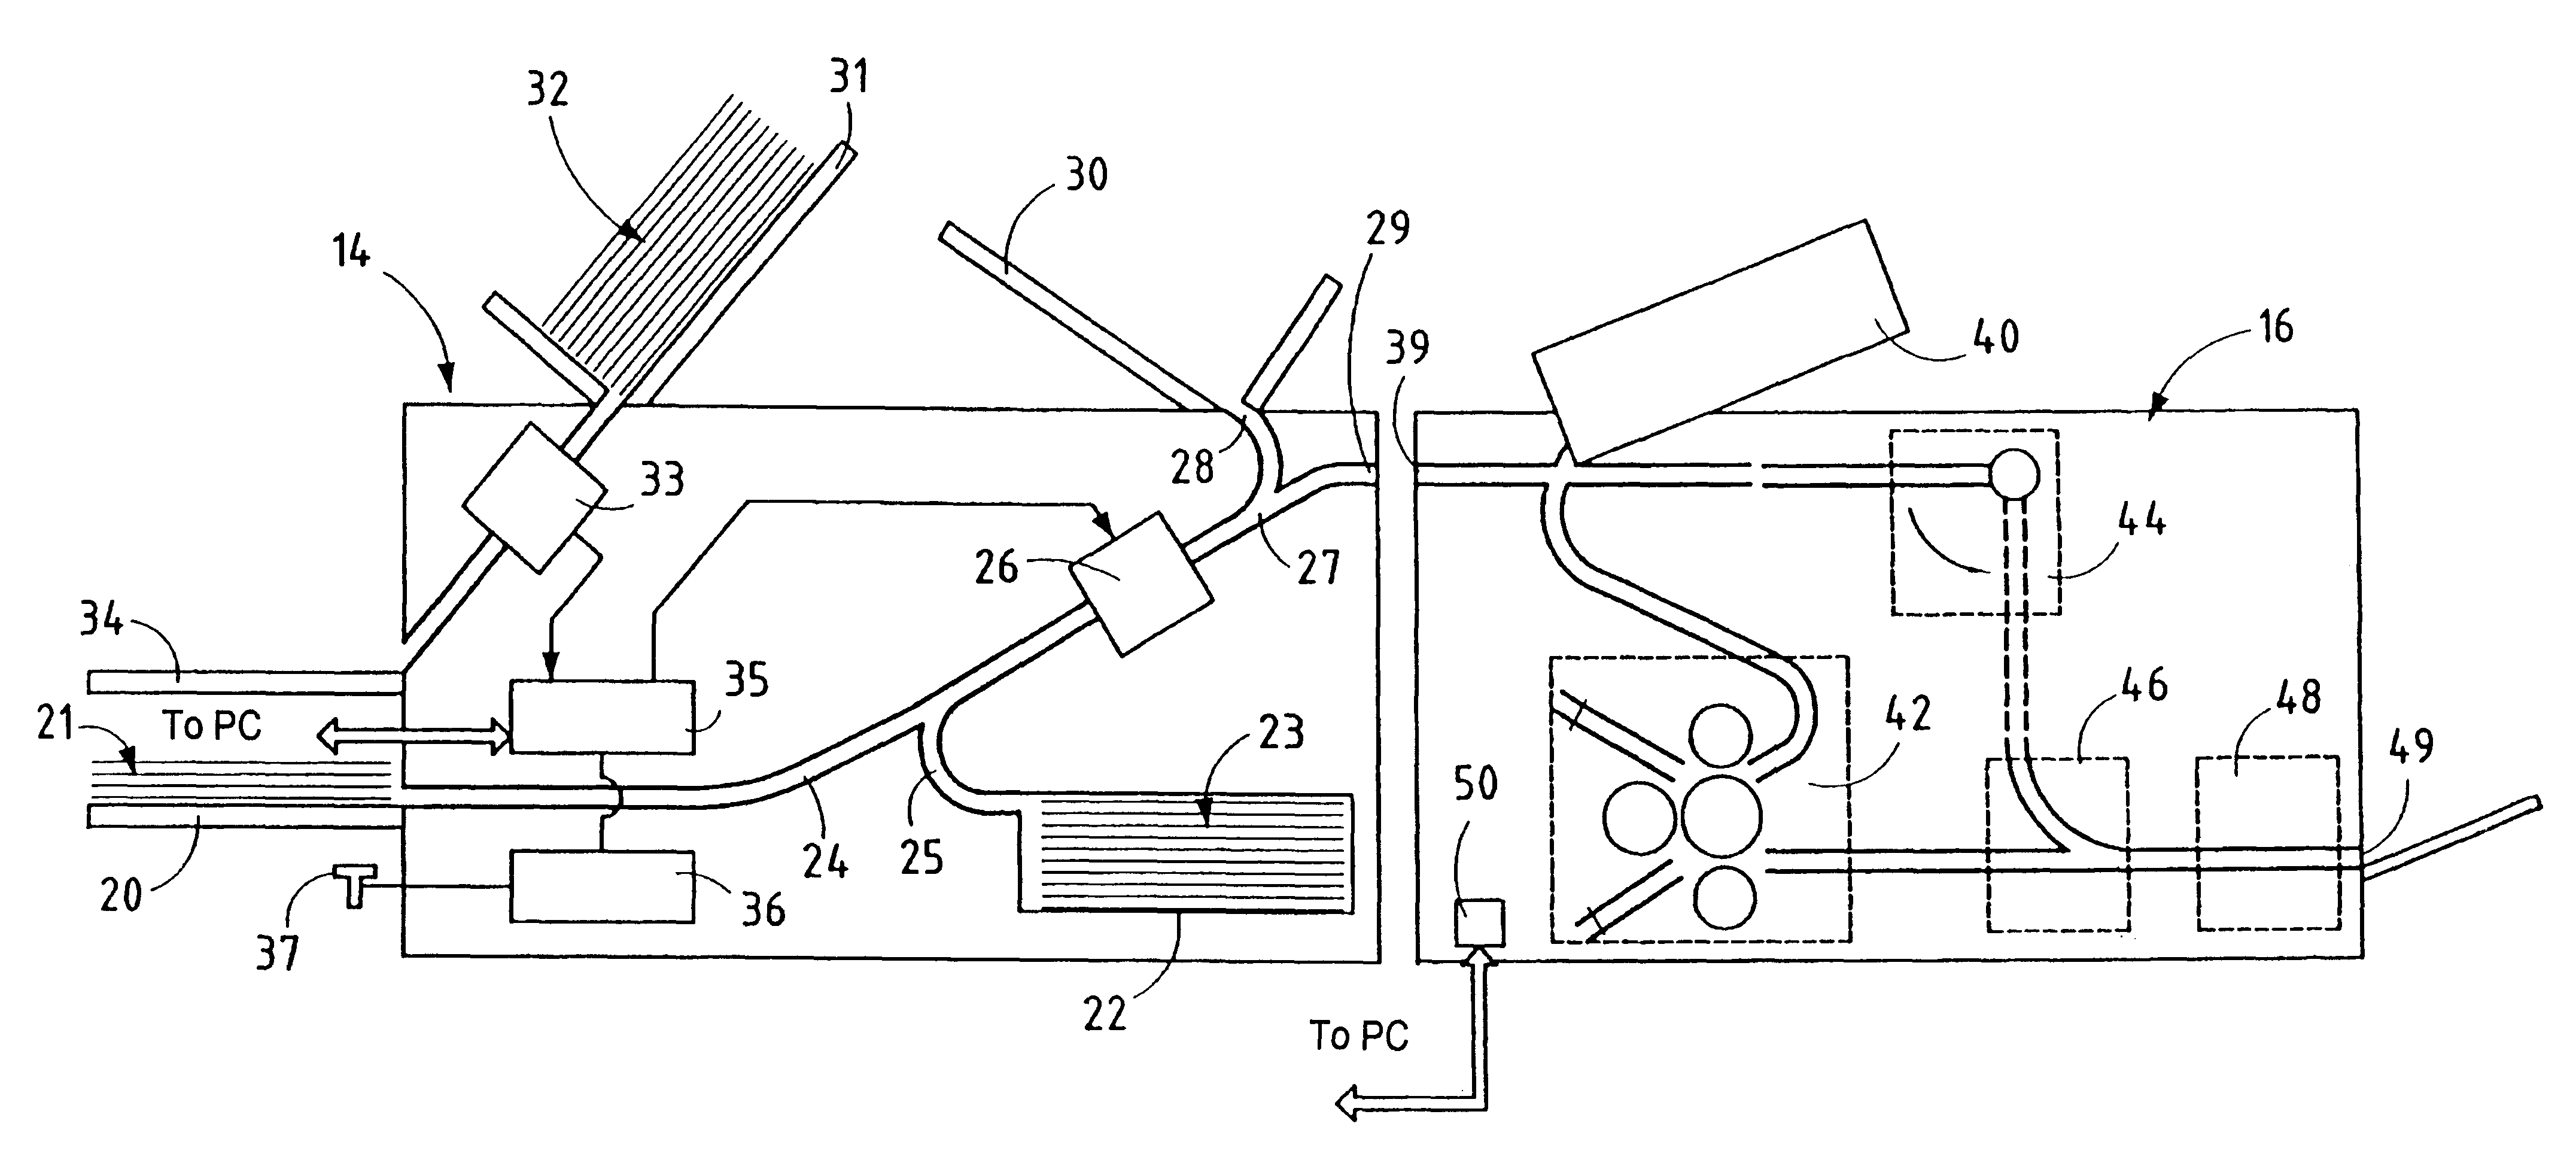 Self-contained multi-function system for preparing mail